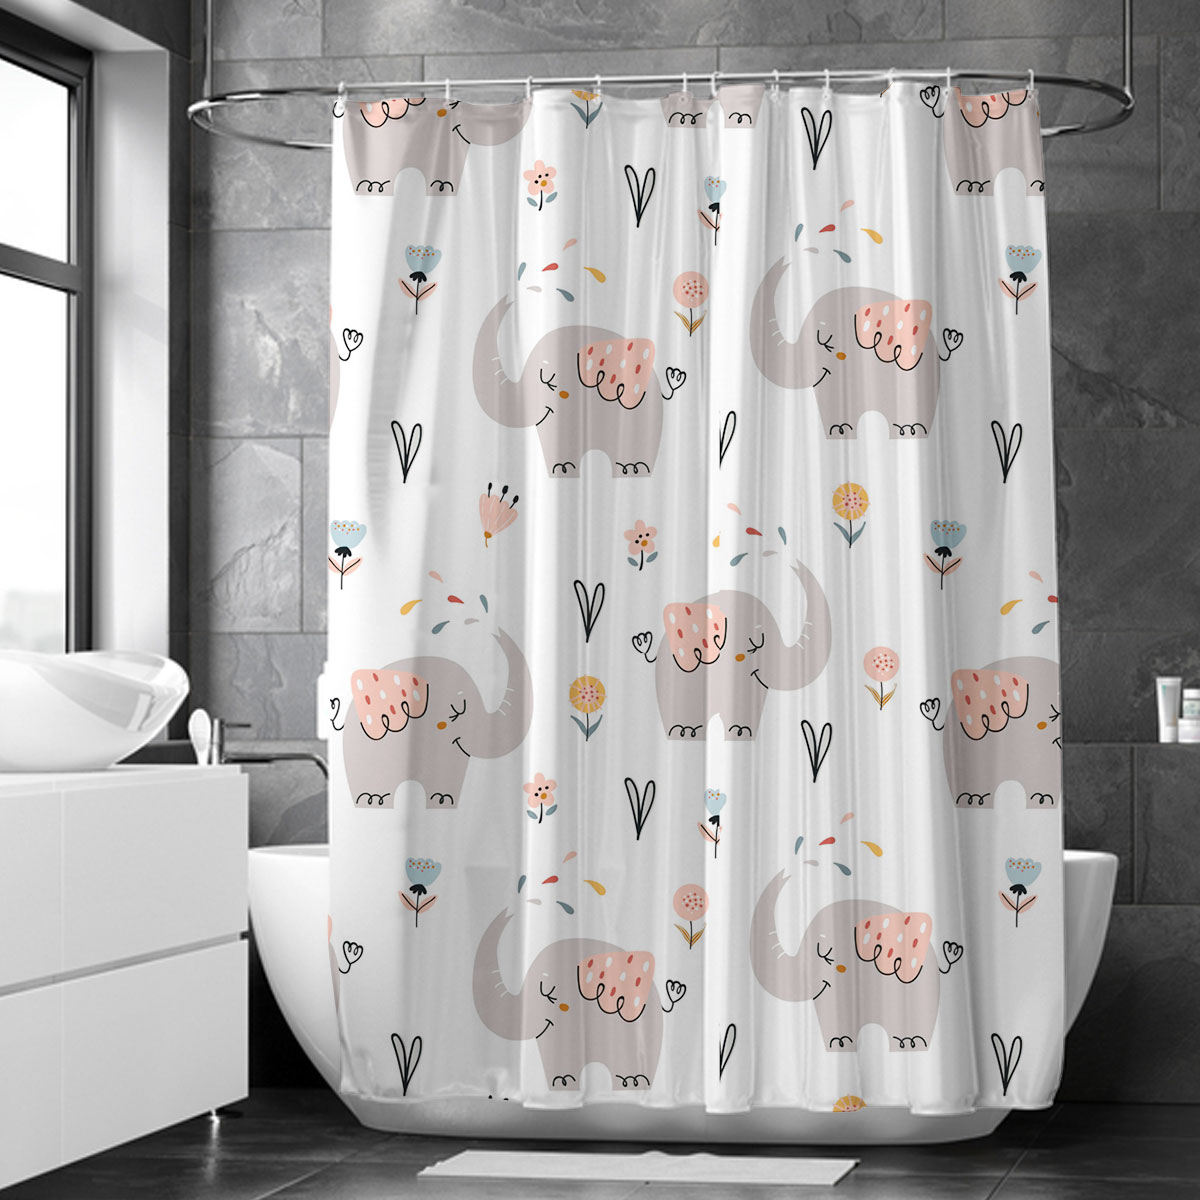 Happy African Elephant Shower Curtain 6